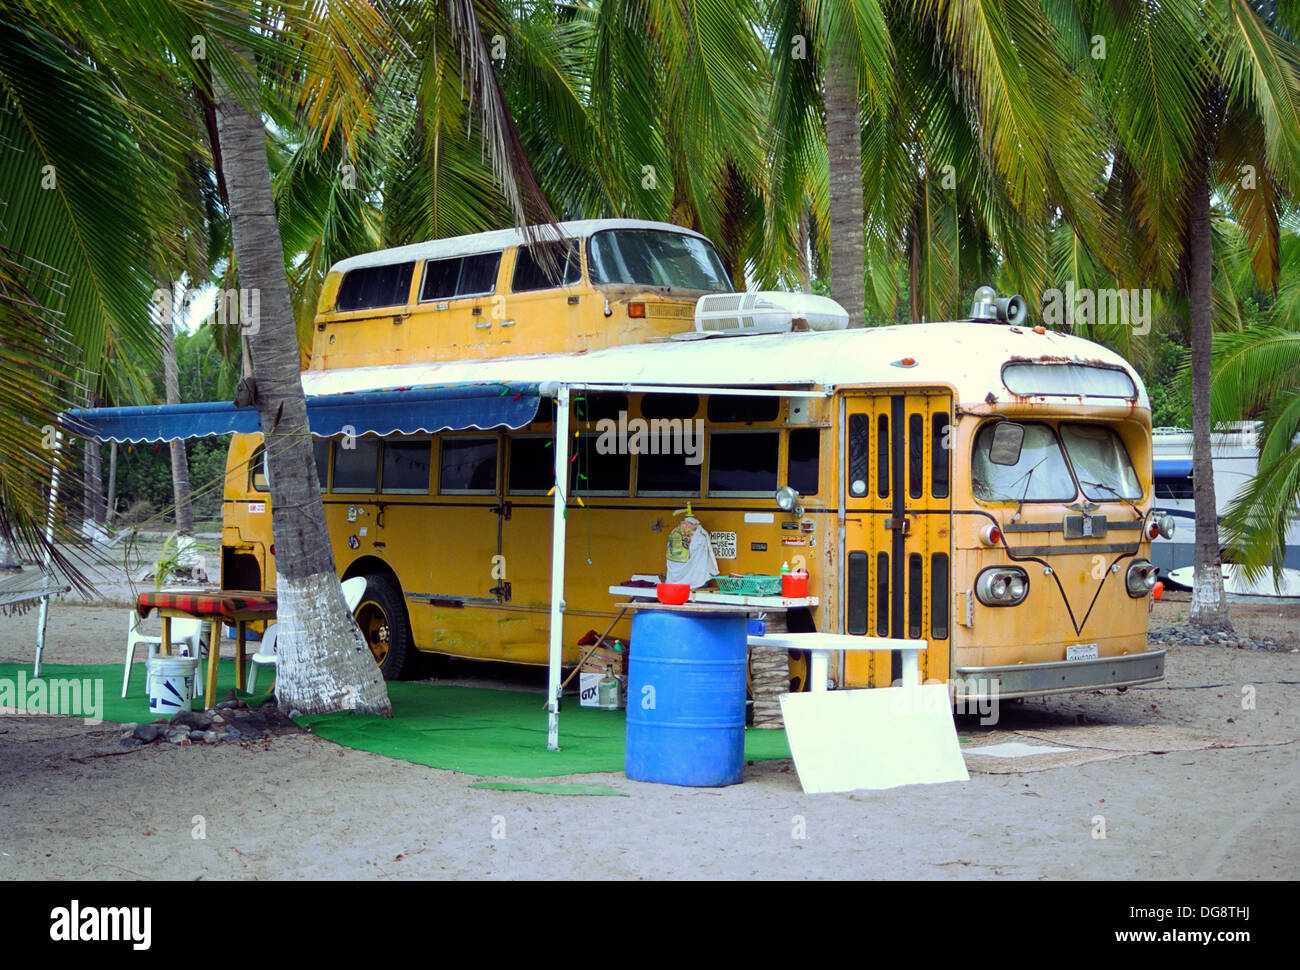 old-yellow-school-bus-converted-into-a-double-decker-camper-DG8THJ.jpg